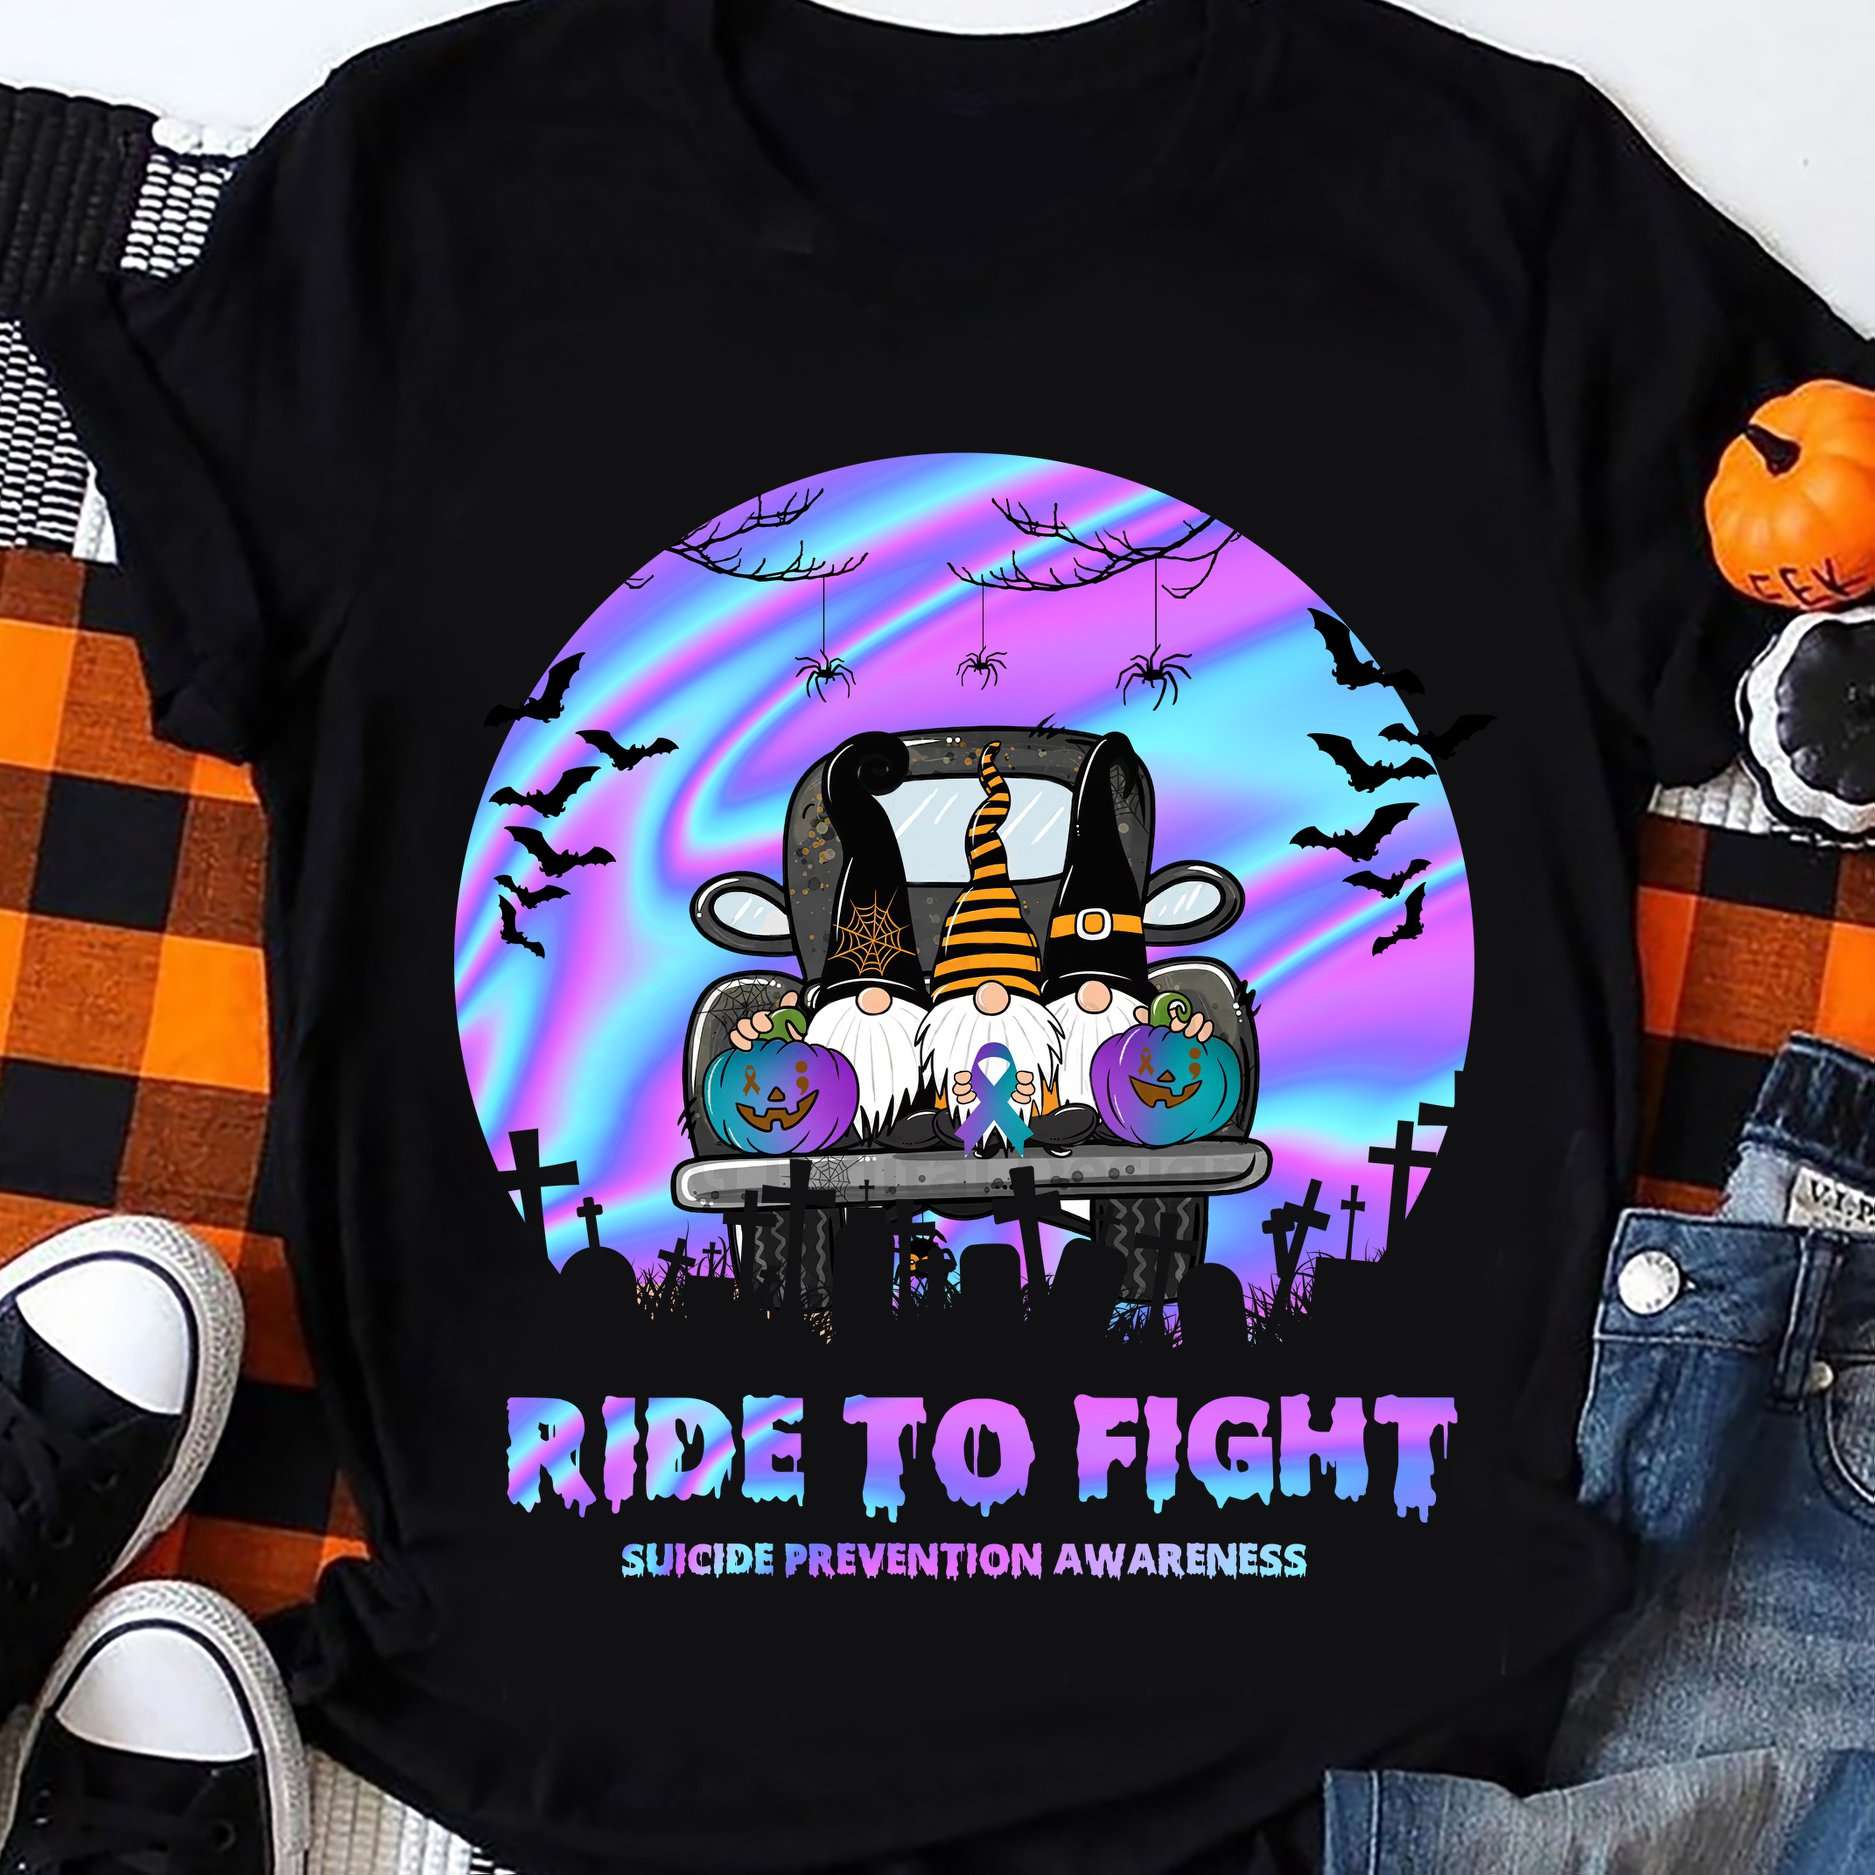 Ride to fight - Suicide prevention awareness, gift for vehicle lover